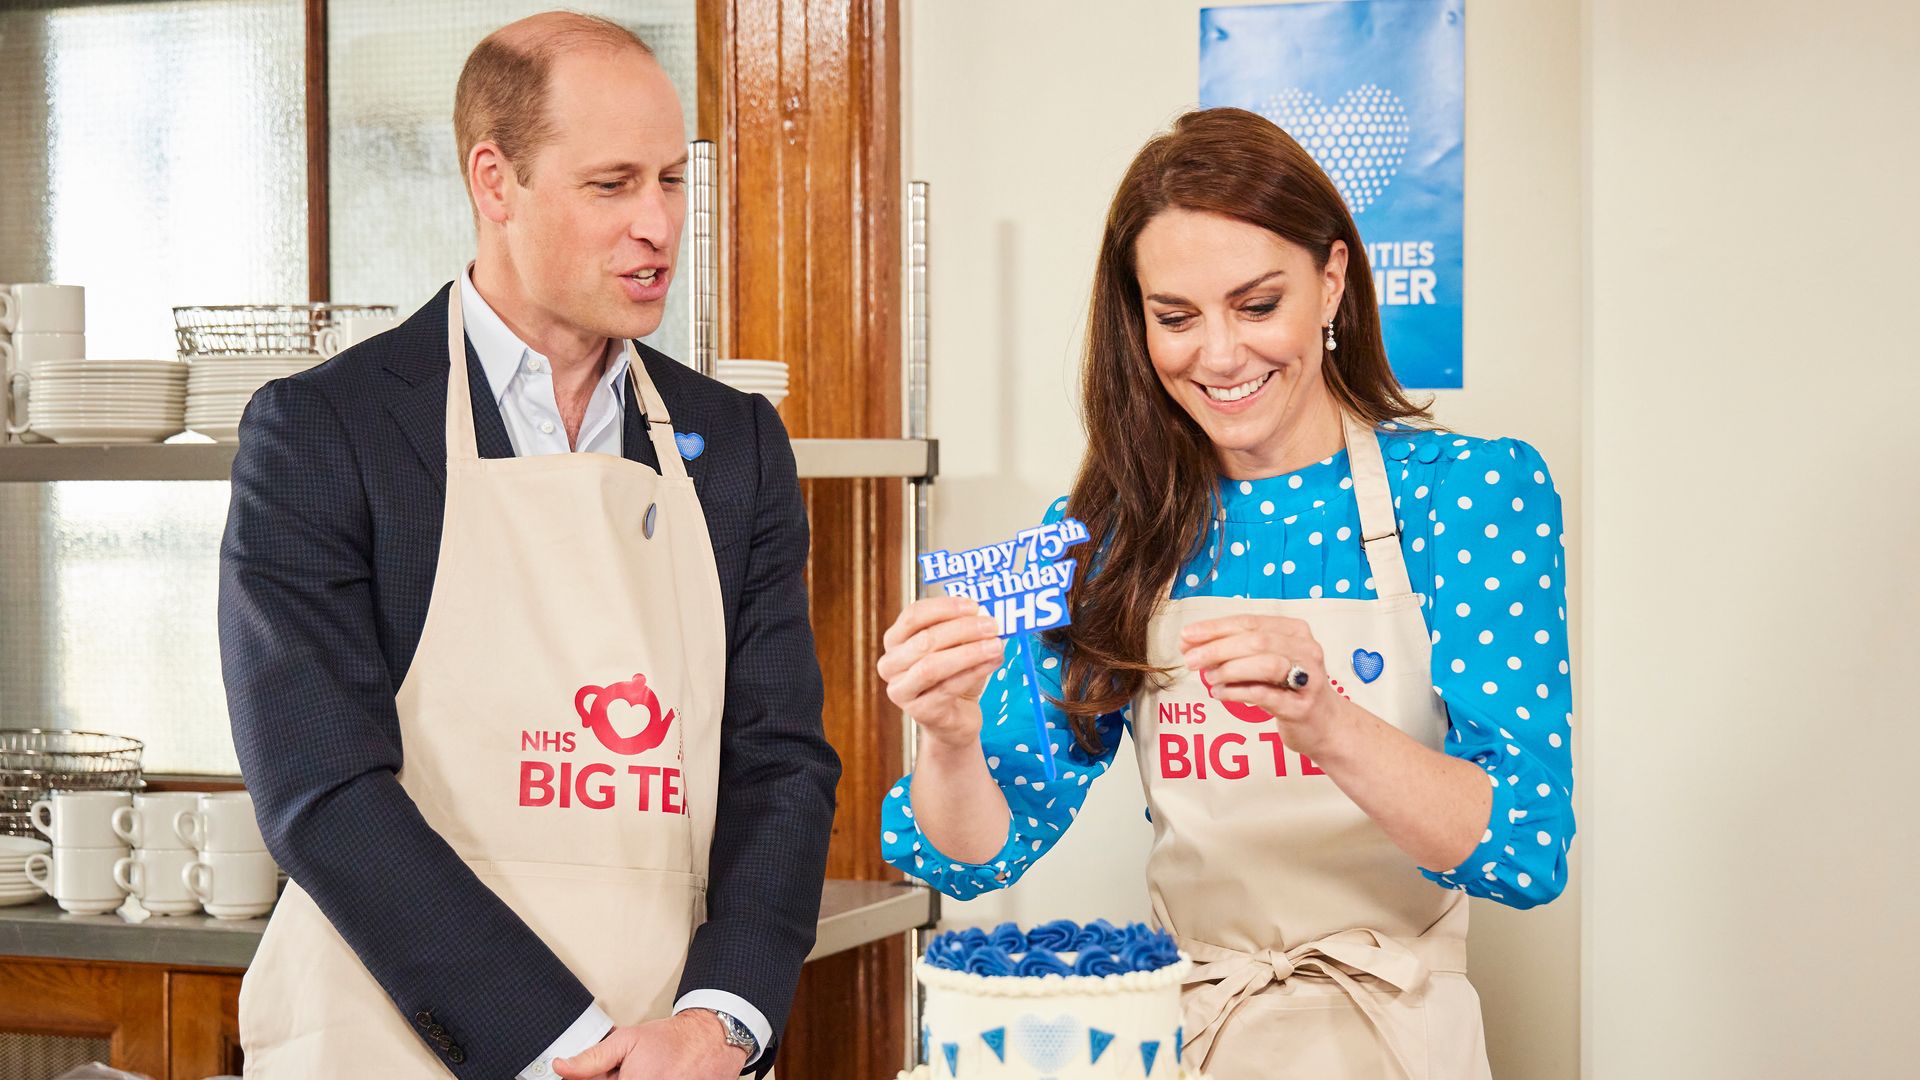 Prince William and Catherine Princess of Wales places a topper on NHS Big Tea cake